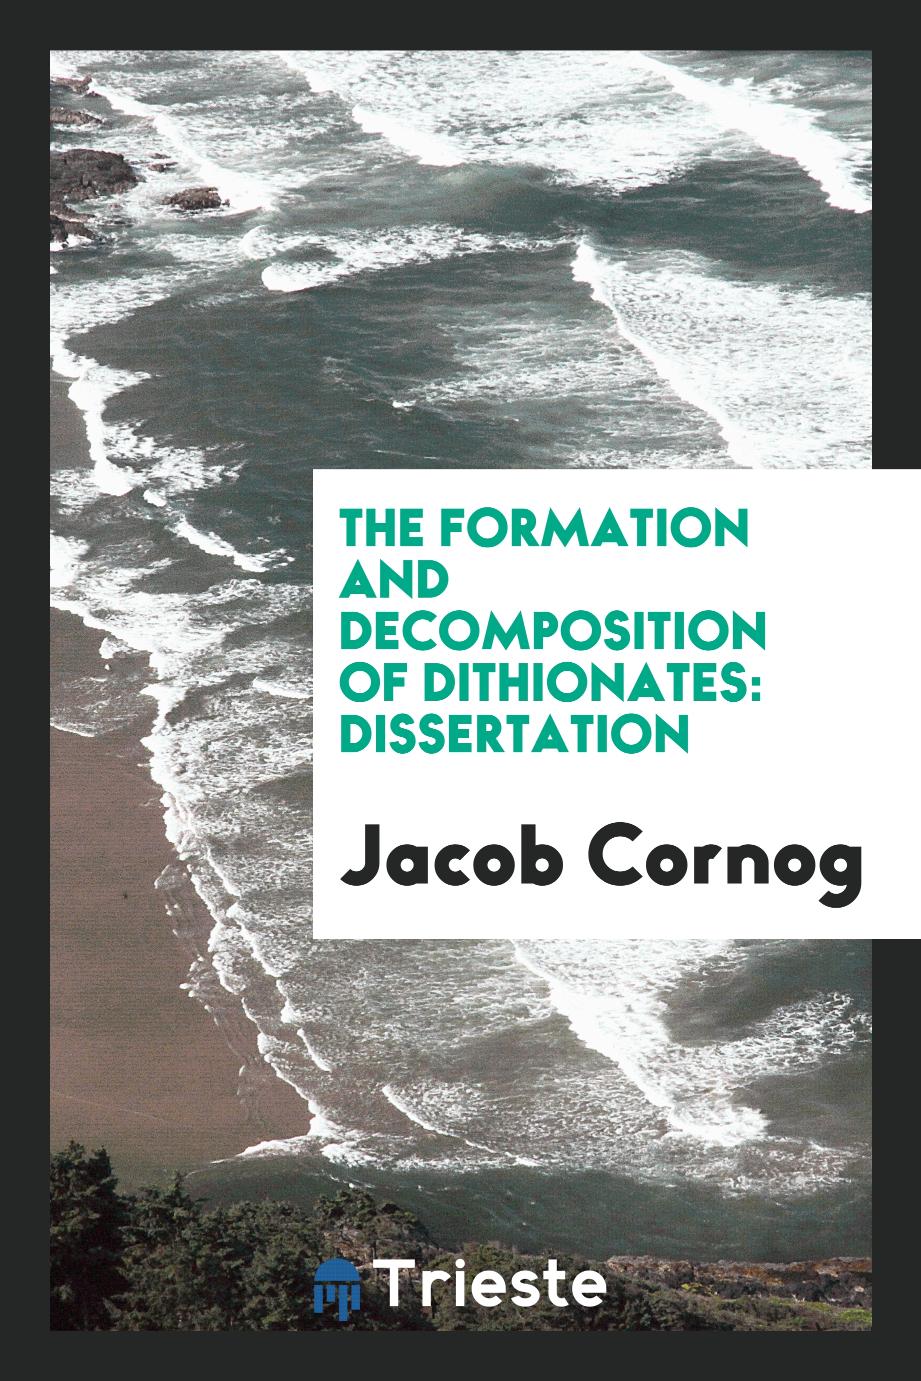 The Formation and Decomposition of Dithionates: dissertation